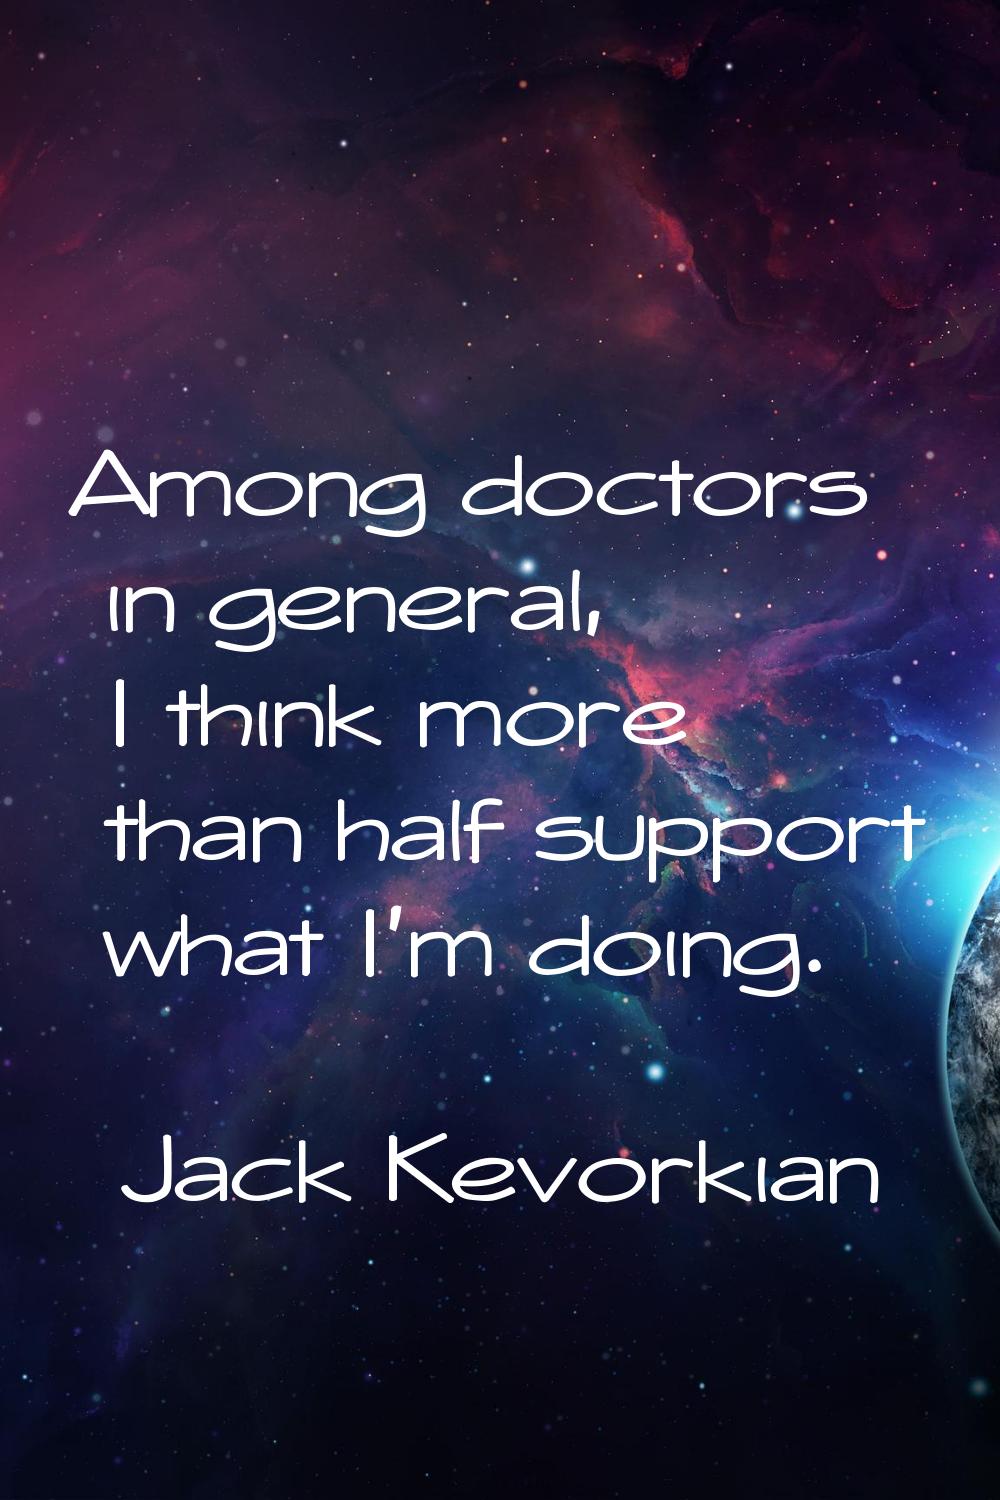 Among doctors in general, I think more than half support what I'm doing.